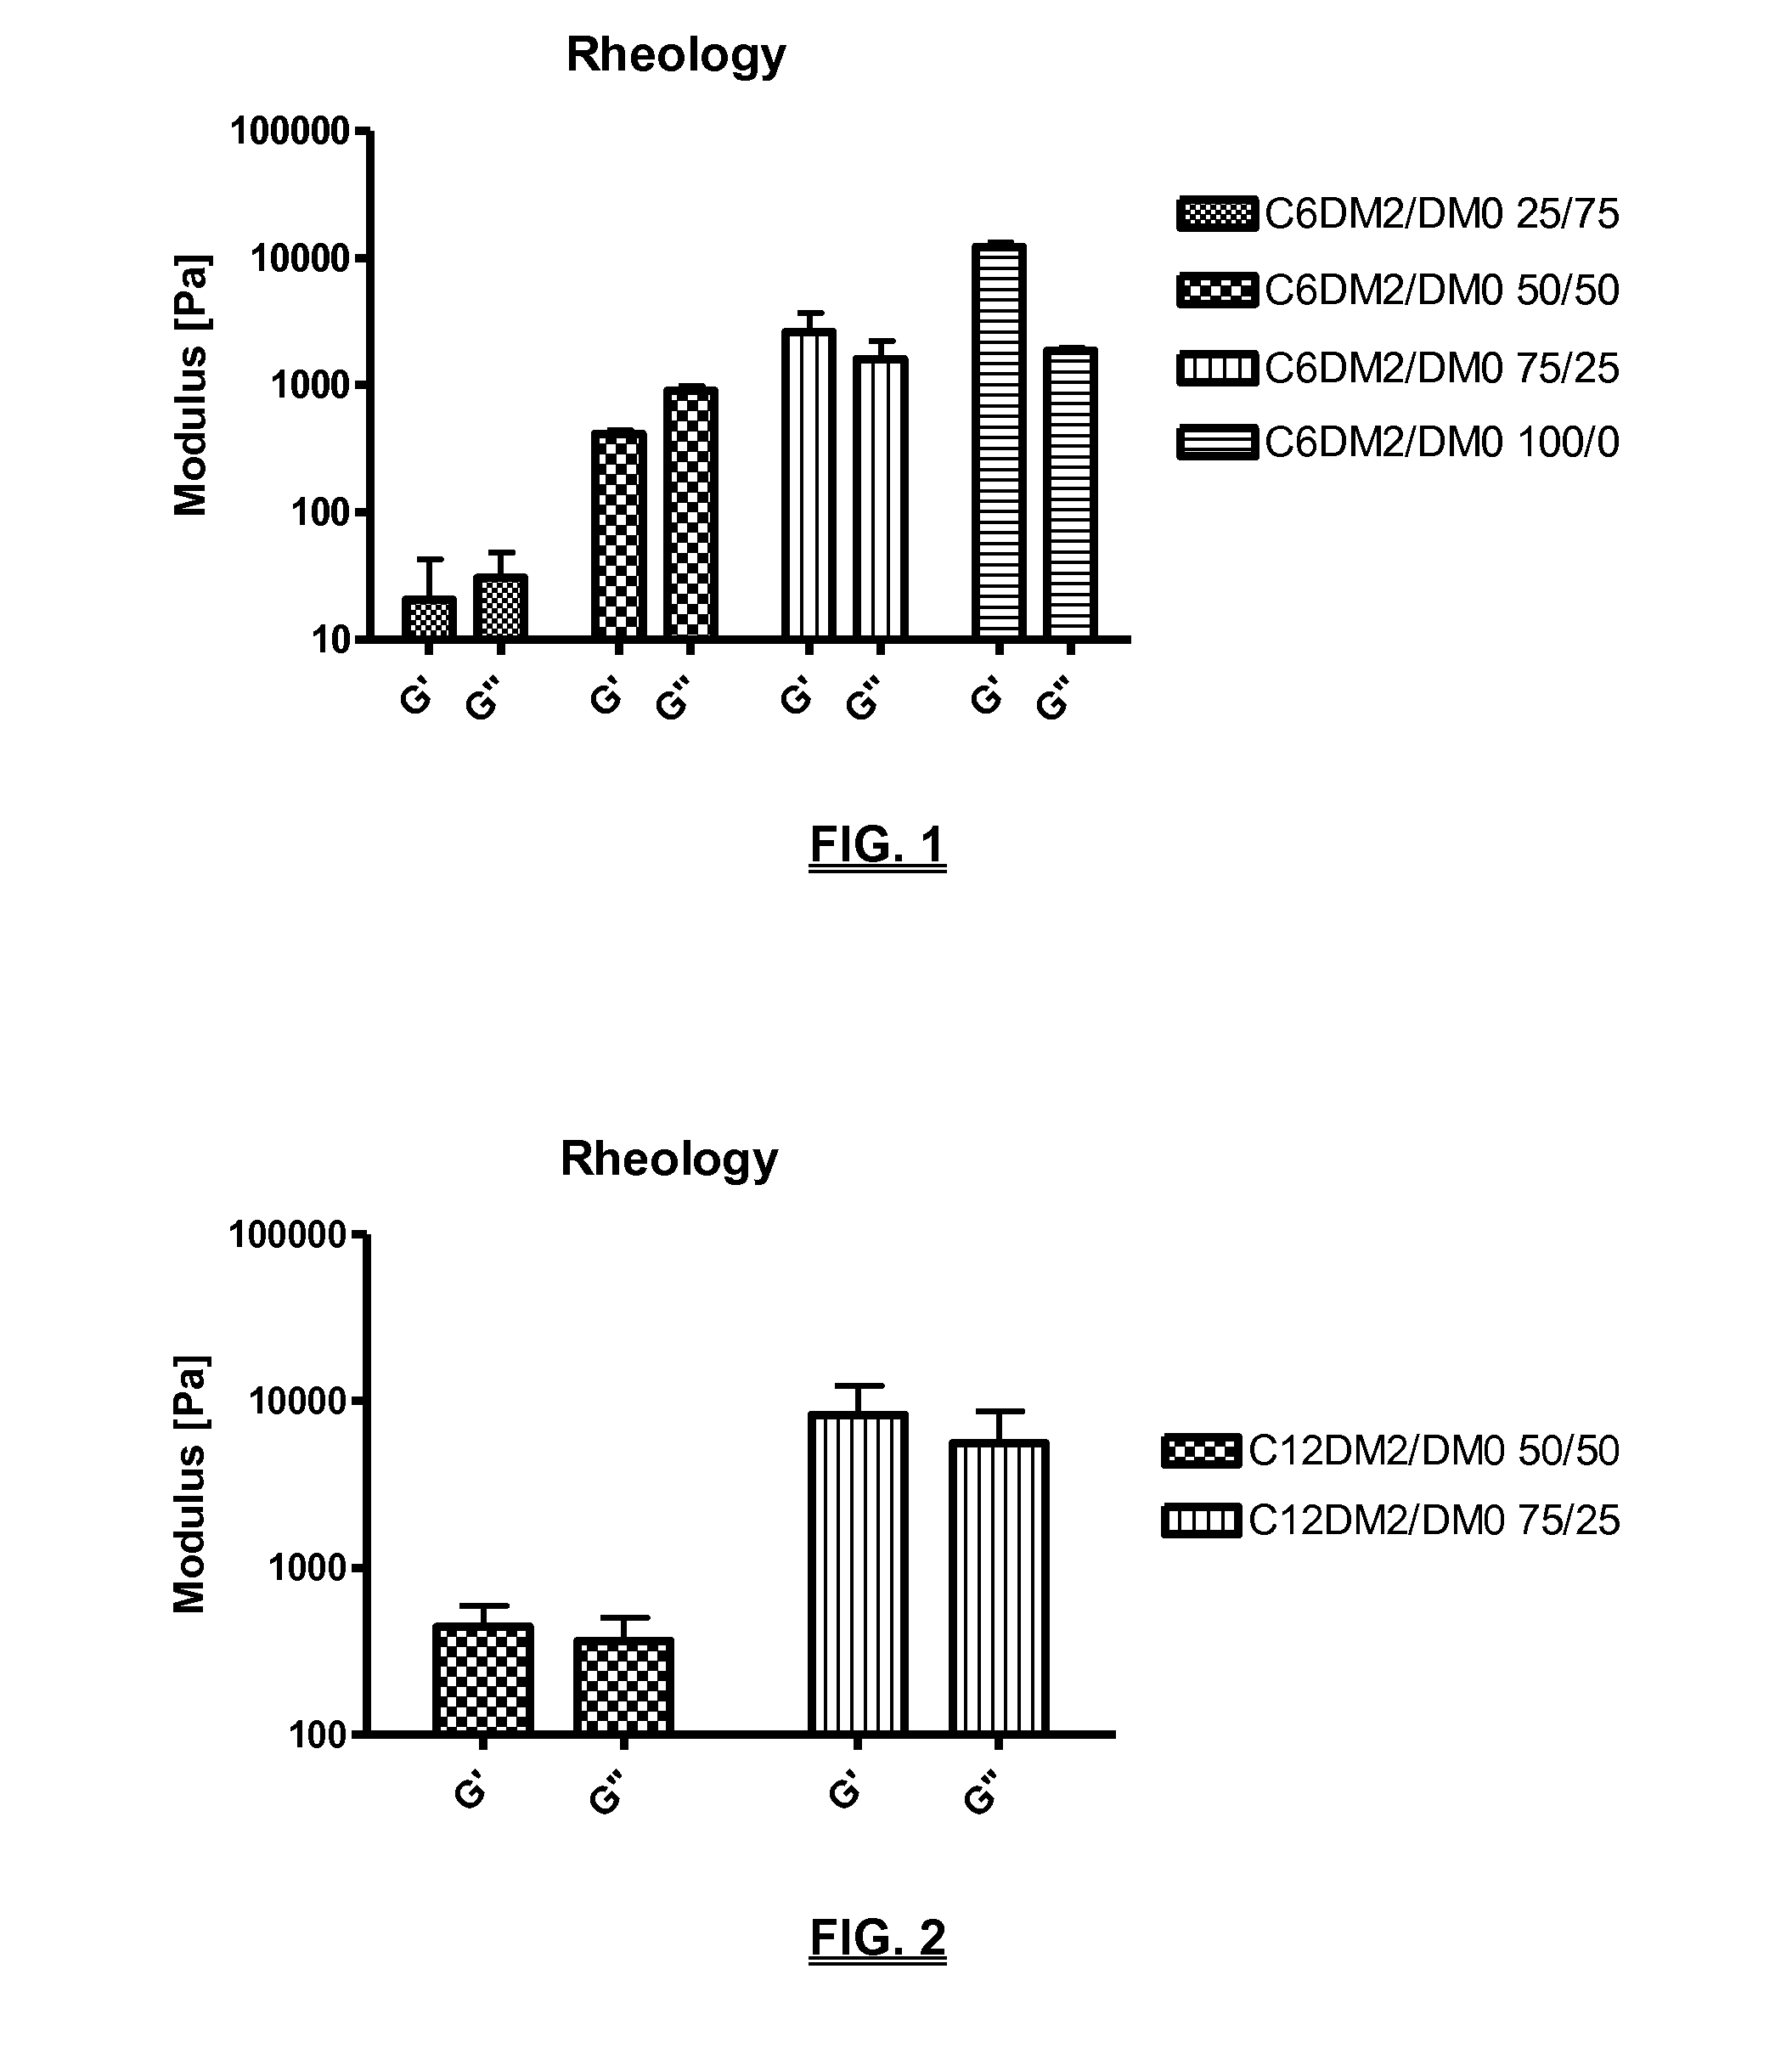 Biodegradable compositions suitable for controlled release